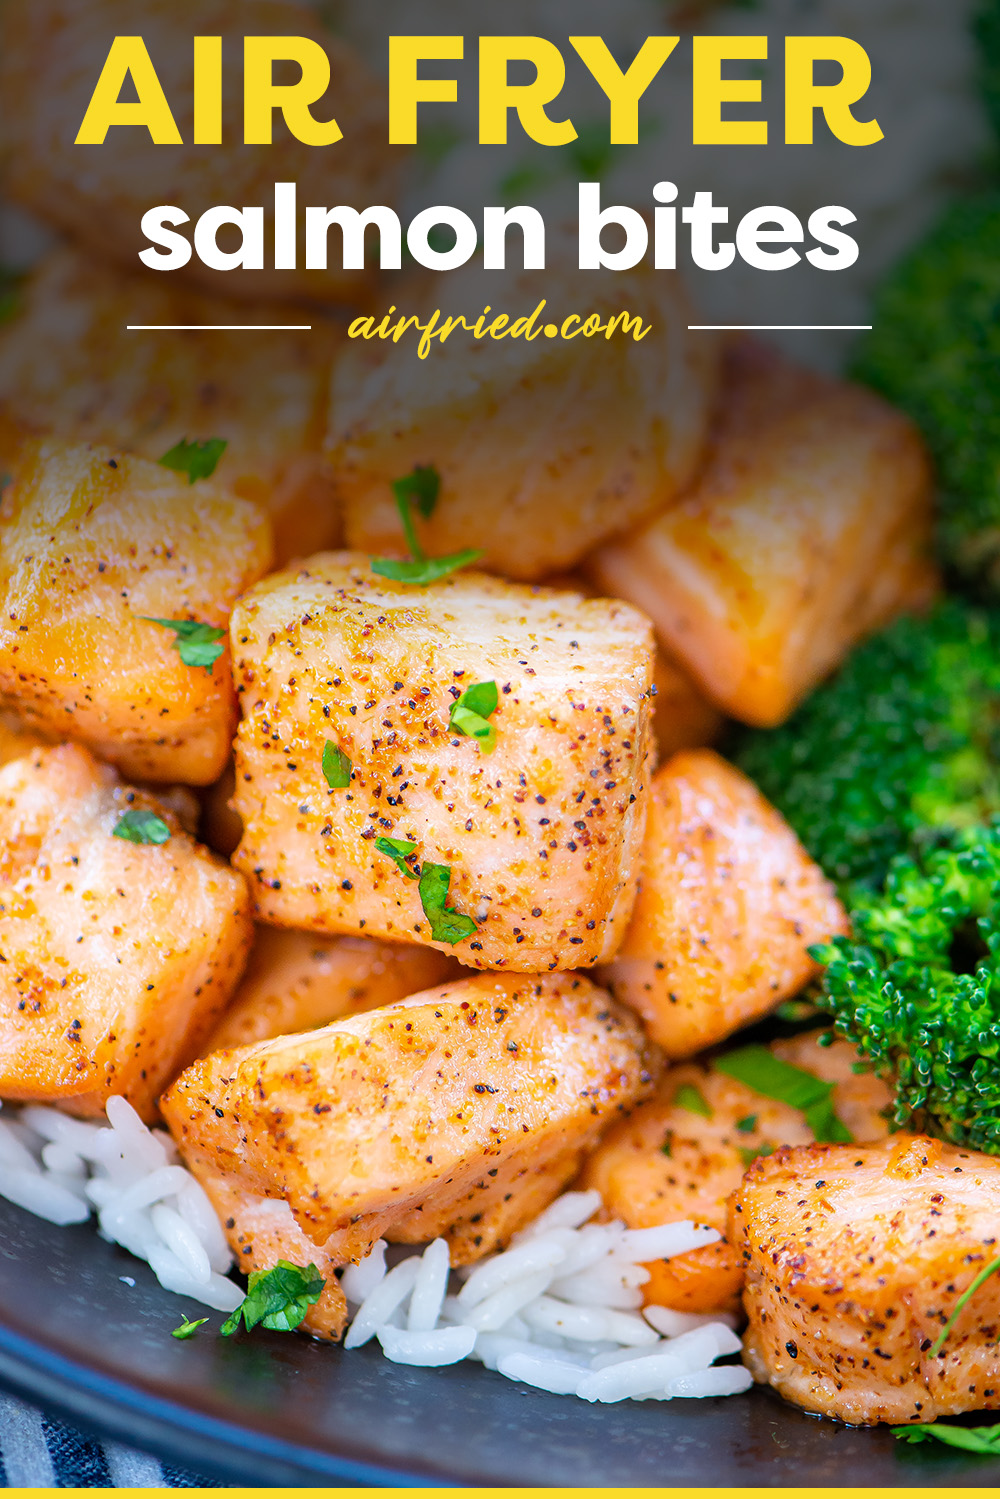 These air fryer cajun salmon bites are simple to make and make a fantastic appetizer or main dish for a dinner!